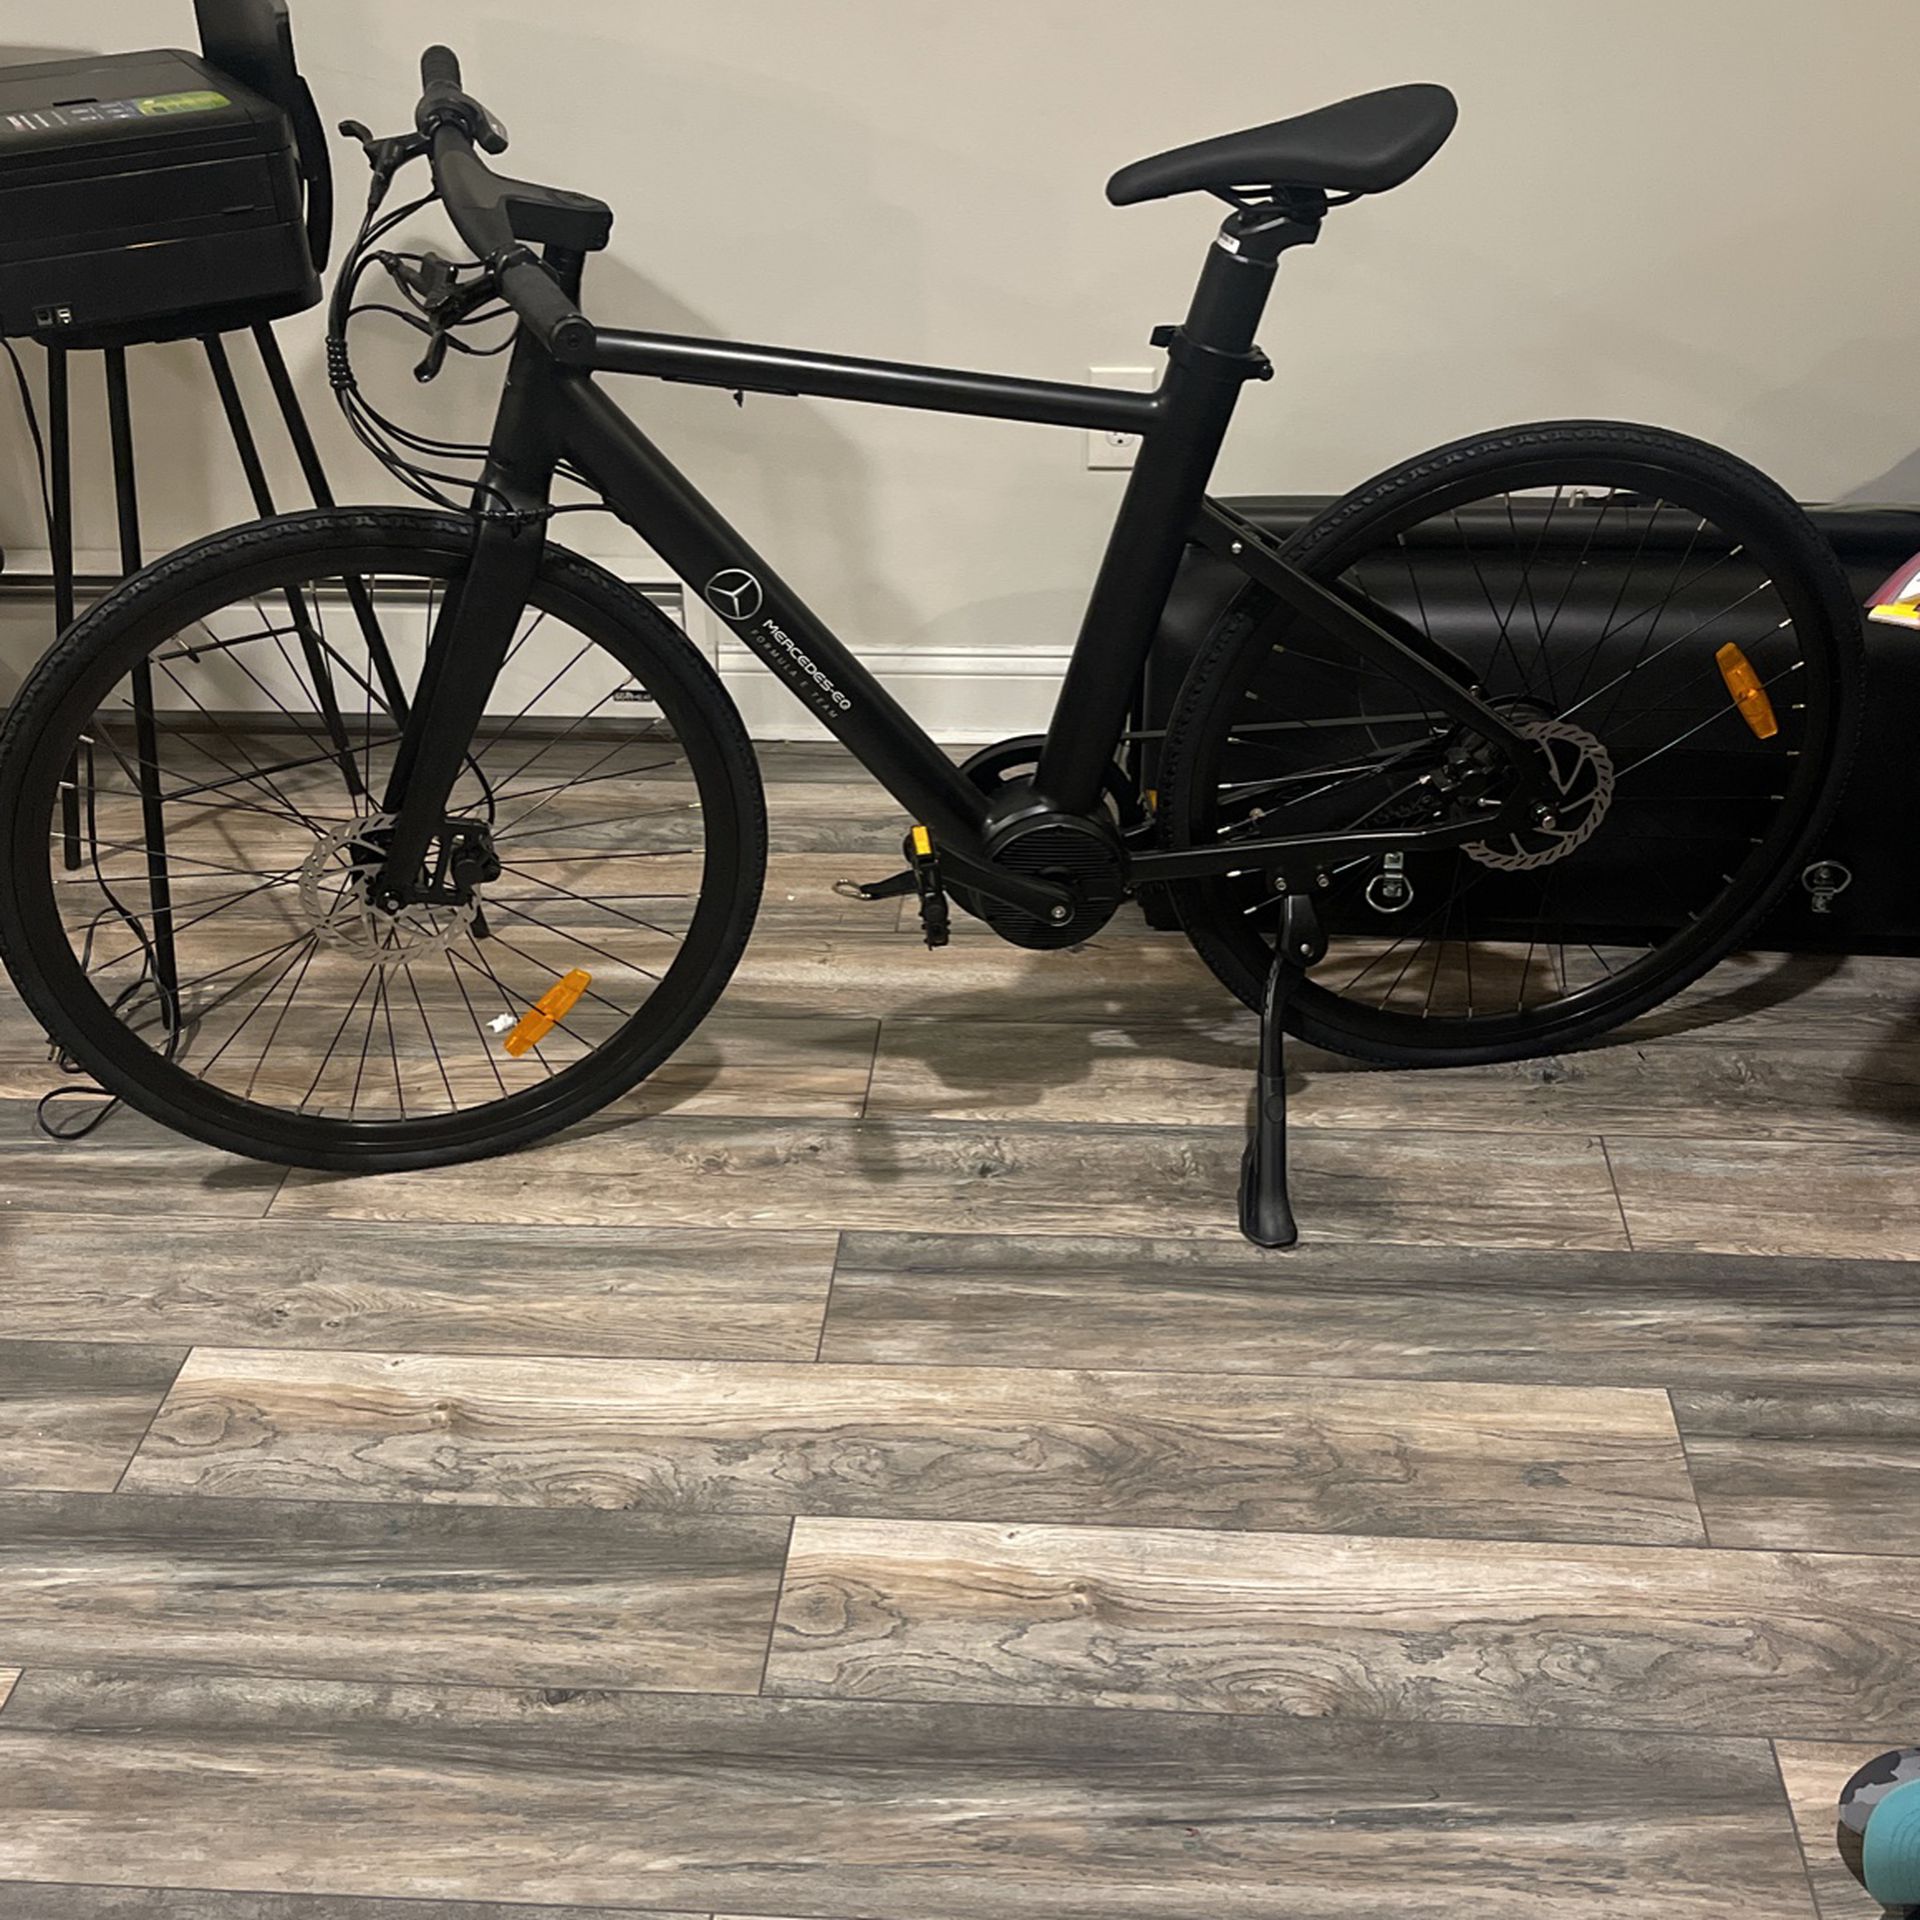 Mercedes-EQ Electric Bike (2 Available) - Never Used!